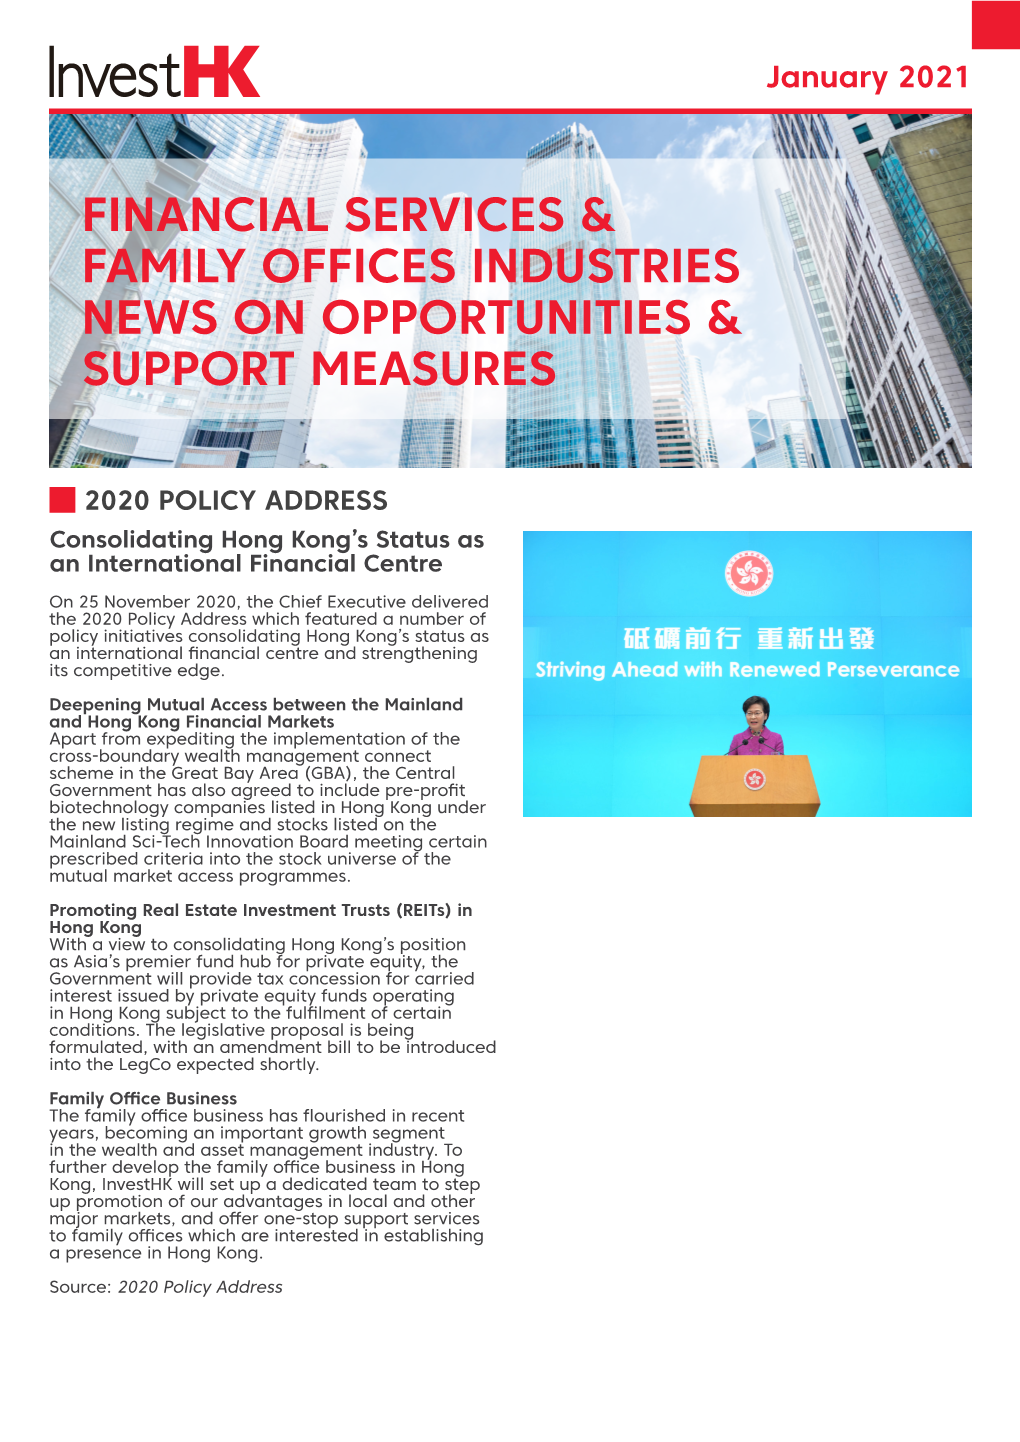 Financial Services & Family Offices Industries News on Opportunities